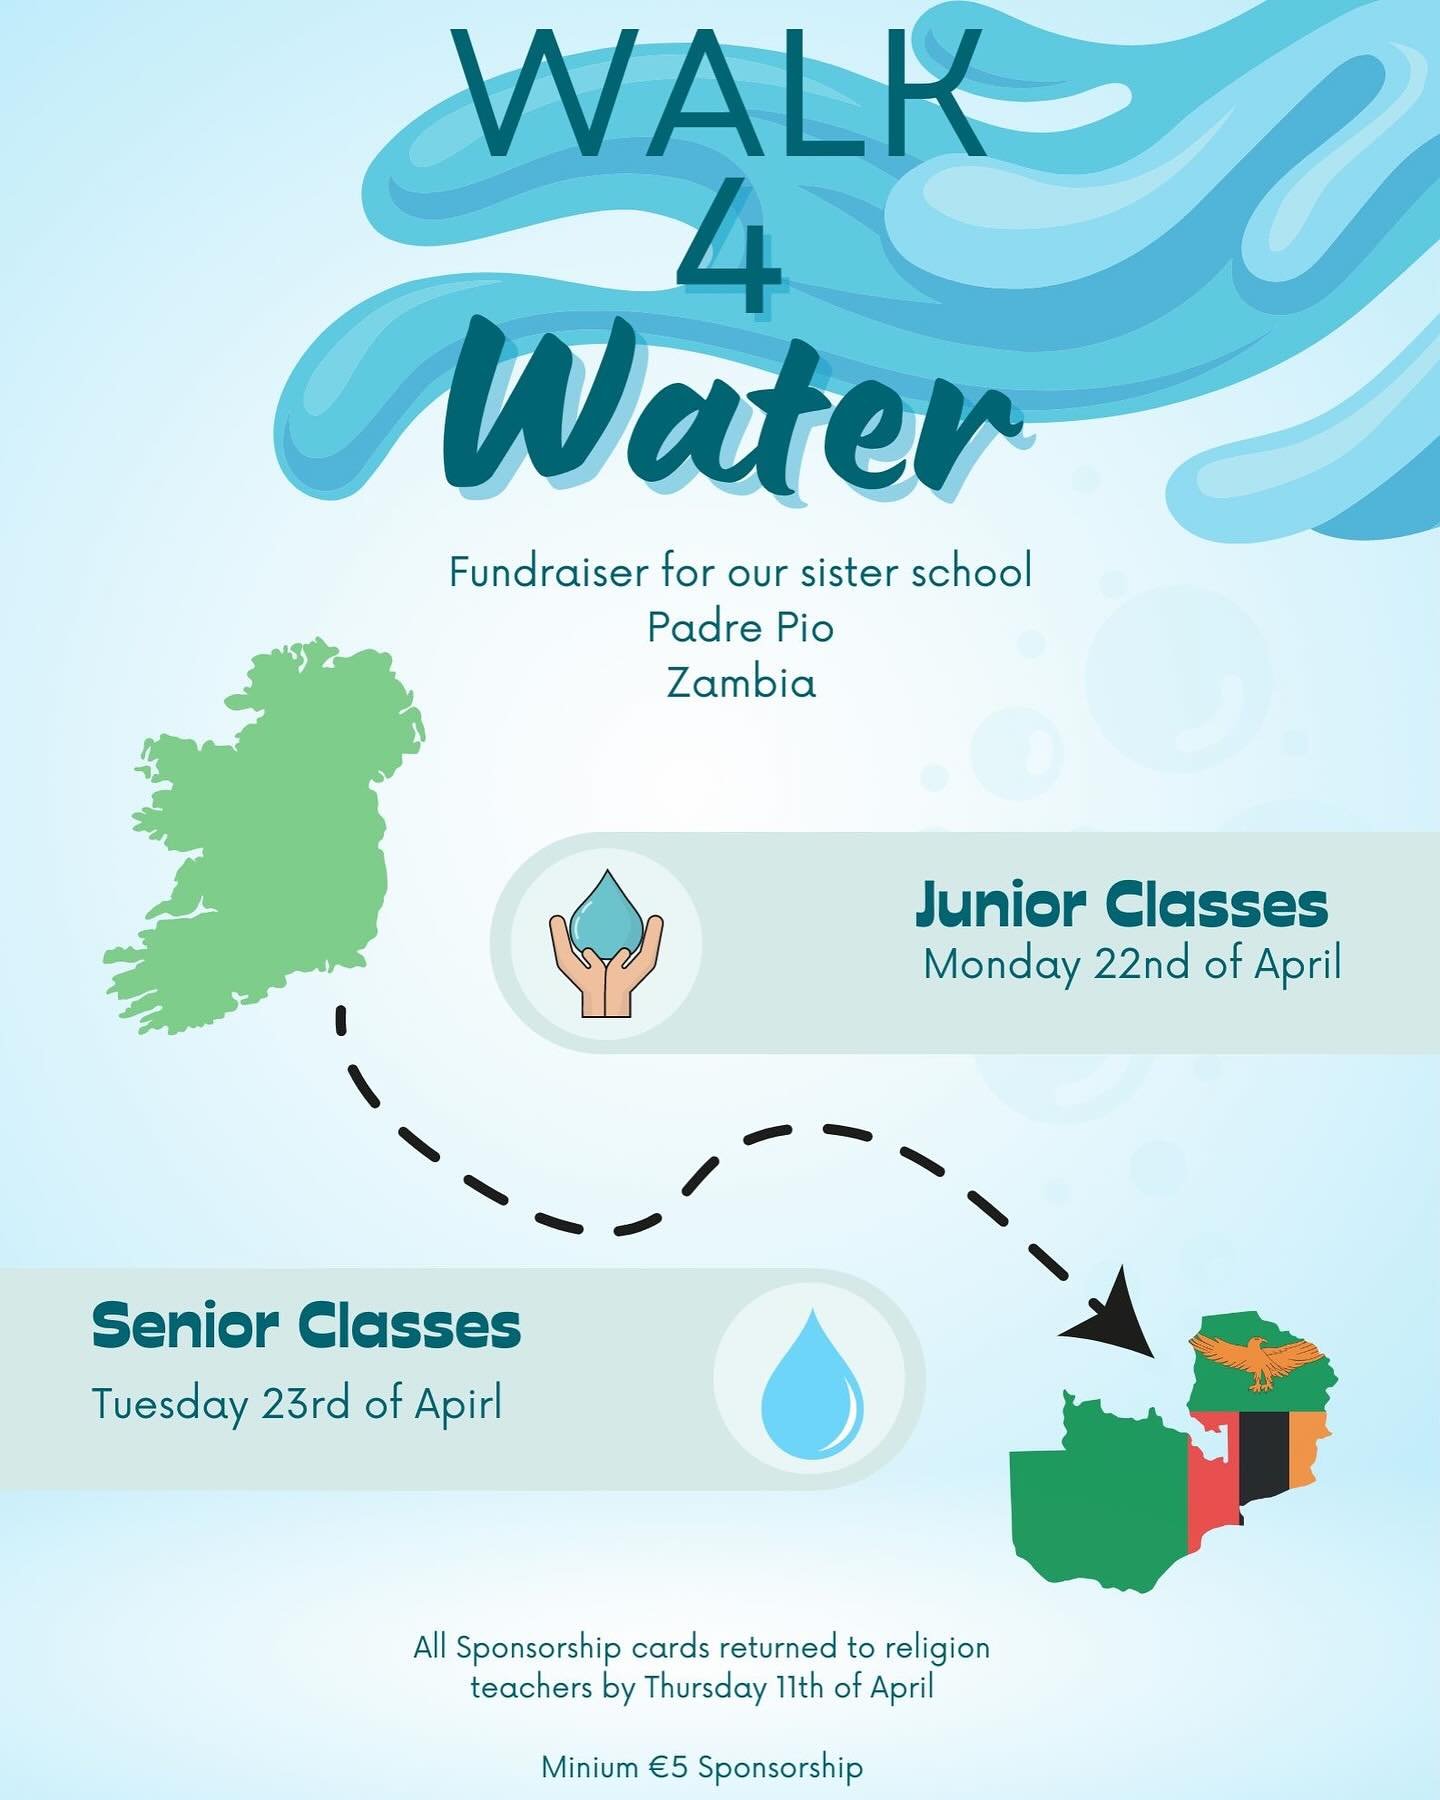 Exciting times ahead as we launch this years Walk for Water in aid of our sister school in Zambia! Excited to see how we get on over the coming weeks!